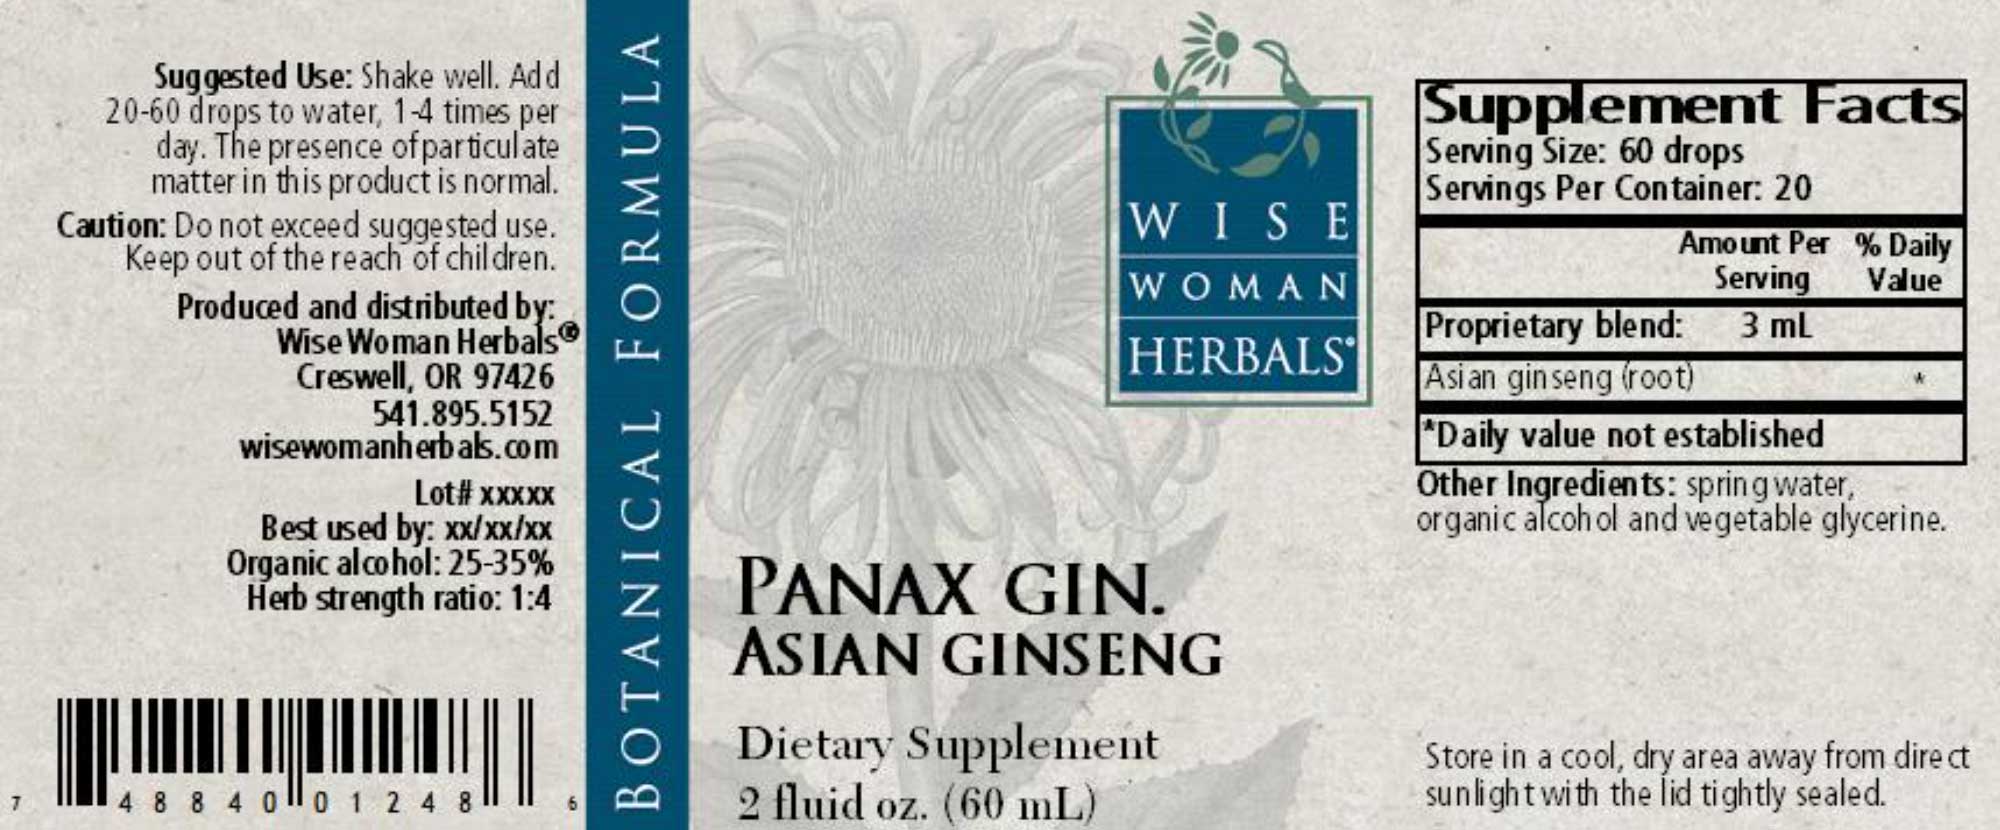 Wise Woman Herbals Panax Ginseng Asian Ginseng Label